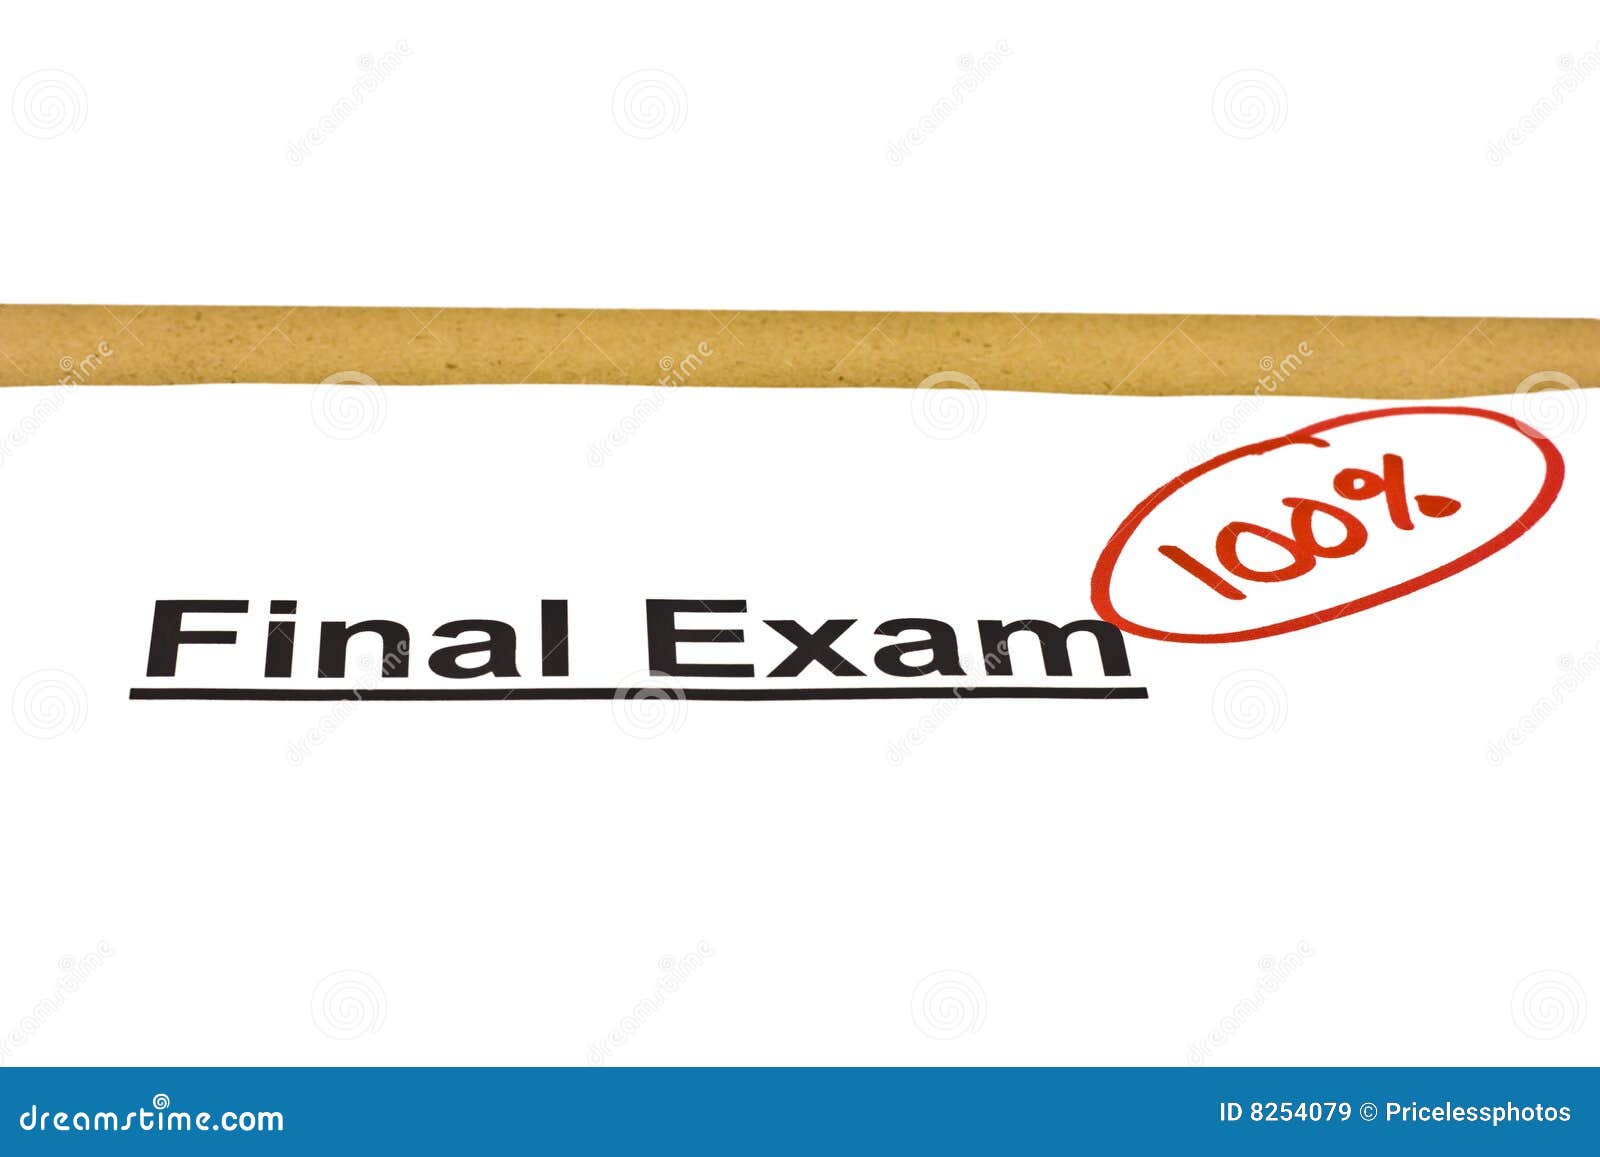 Rules About Final Exams